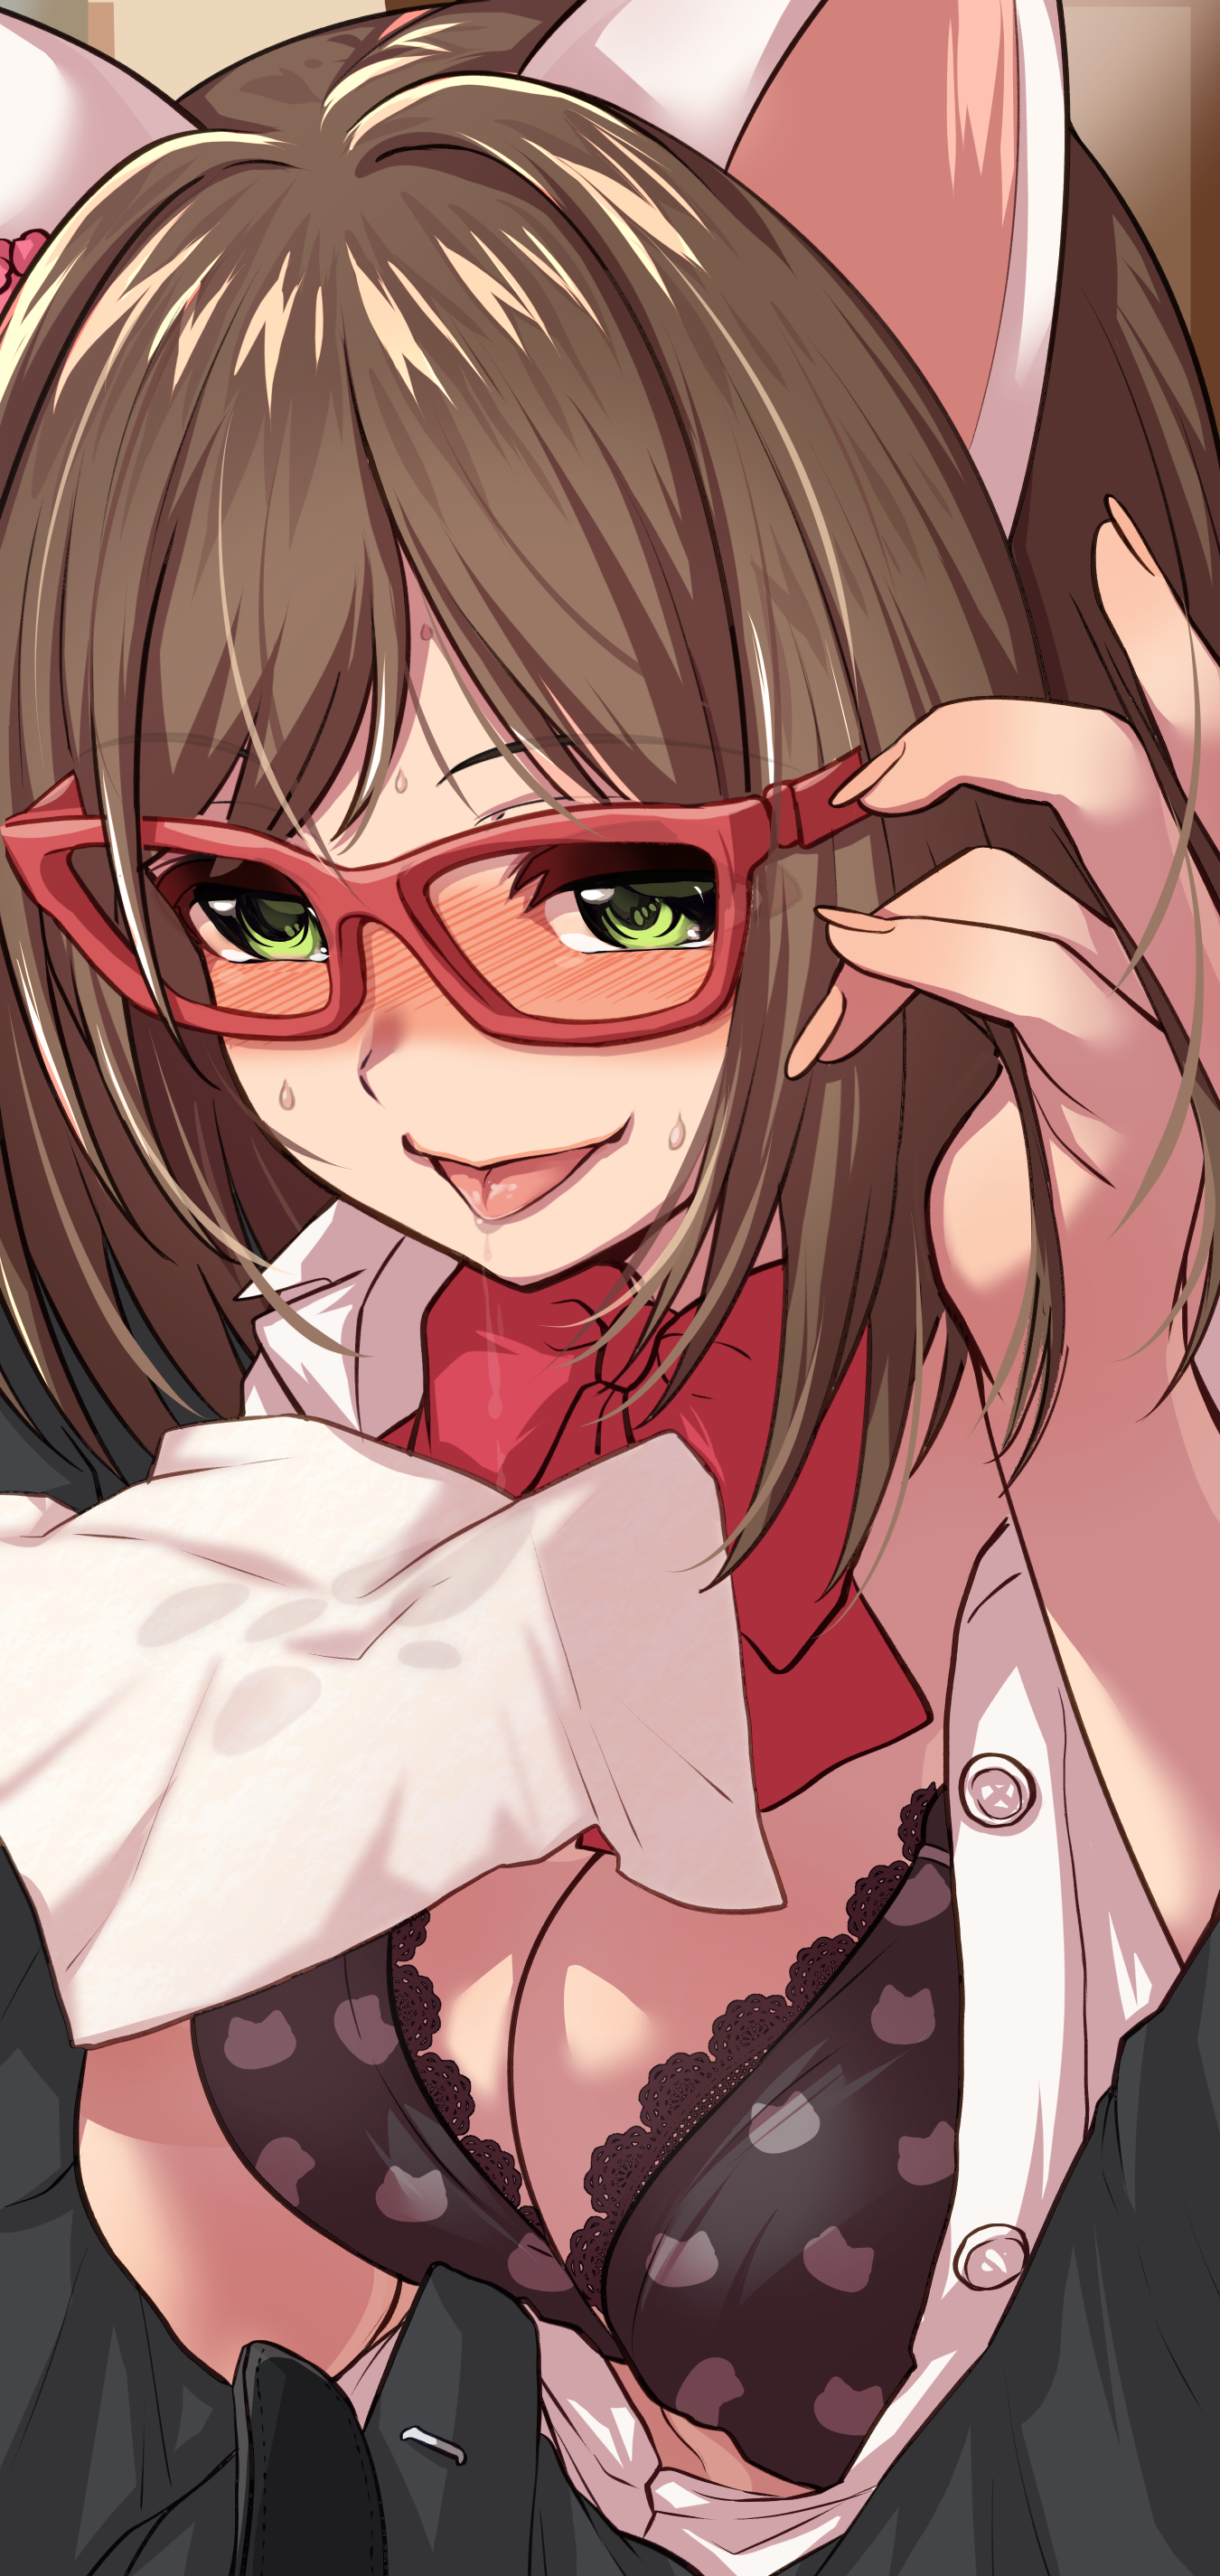 Anime 1350x2850 anime anime girls digital art artwork 2D portrait display Morino Shoutarou animal ears brunette green eyes glasses tongue out open clothes bra cleavage